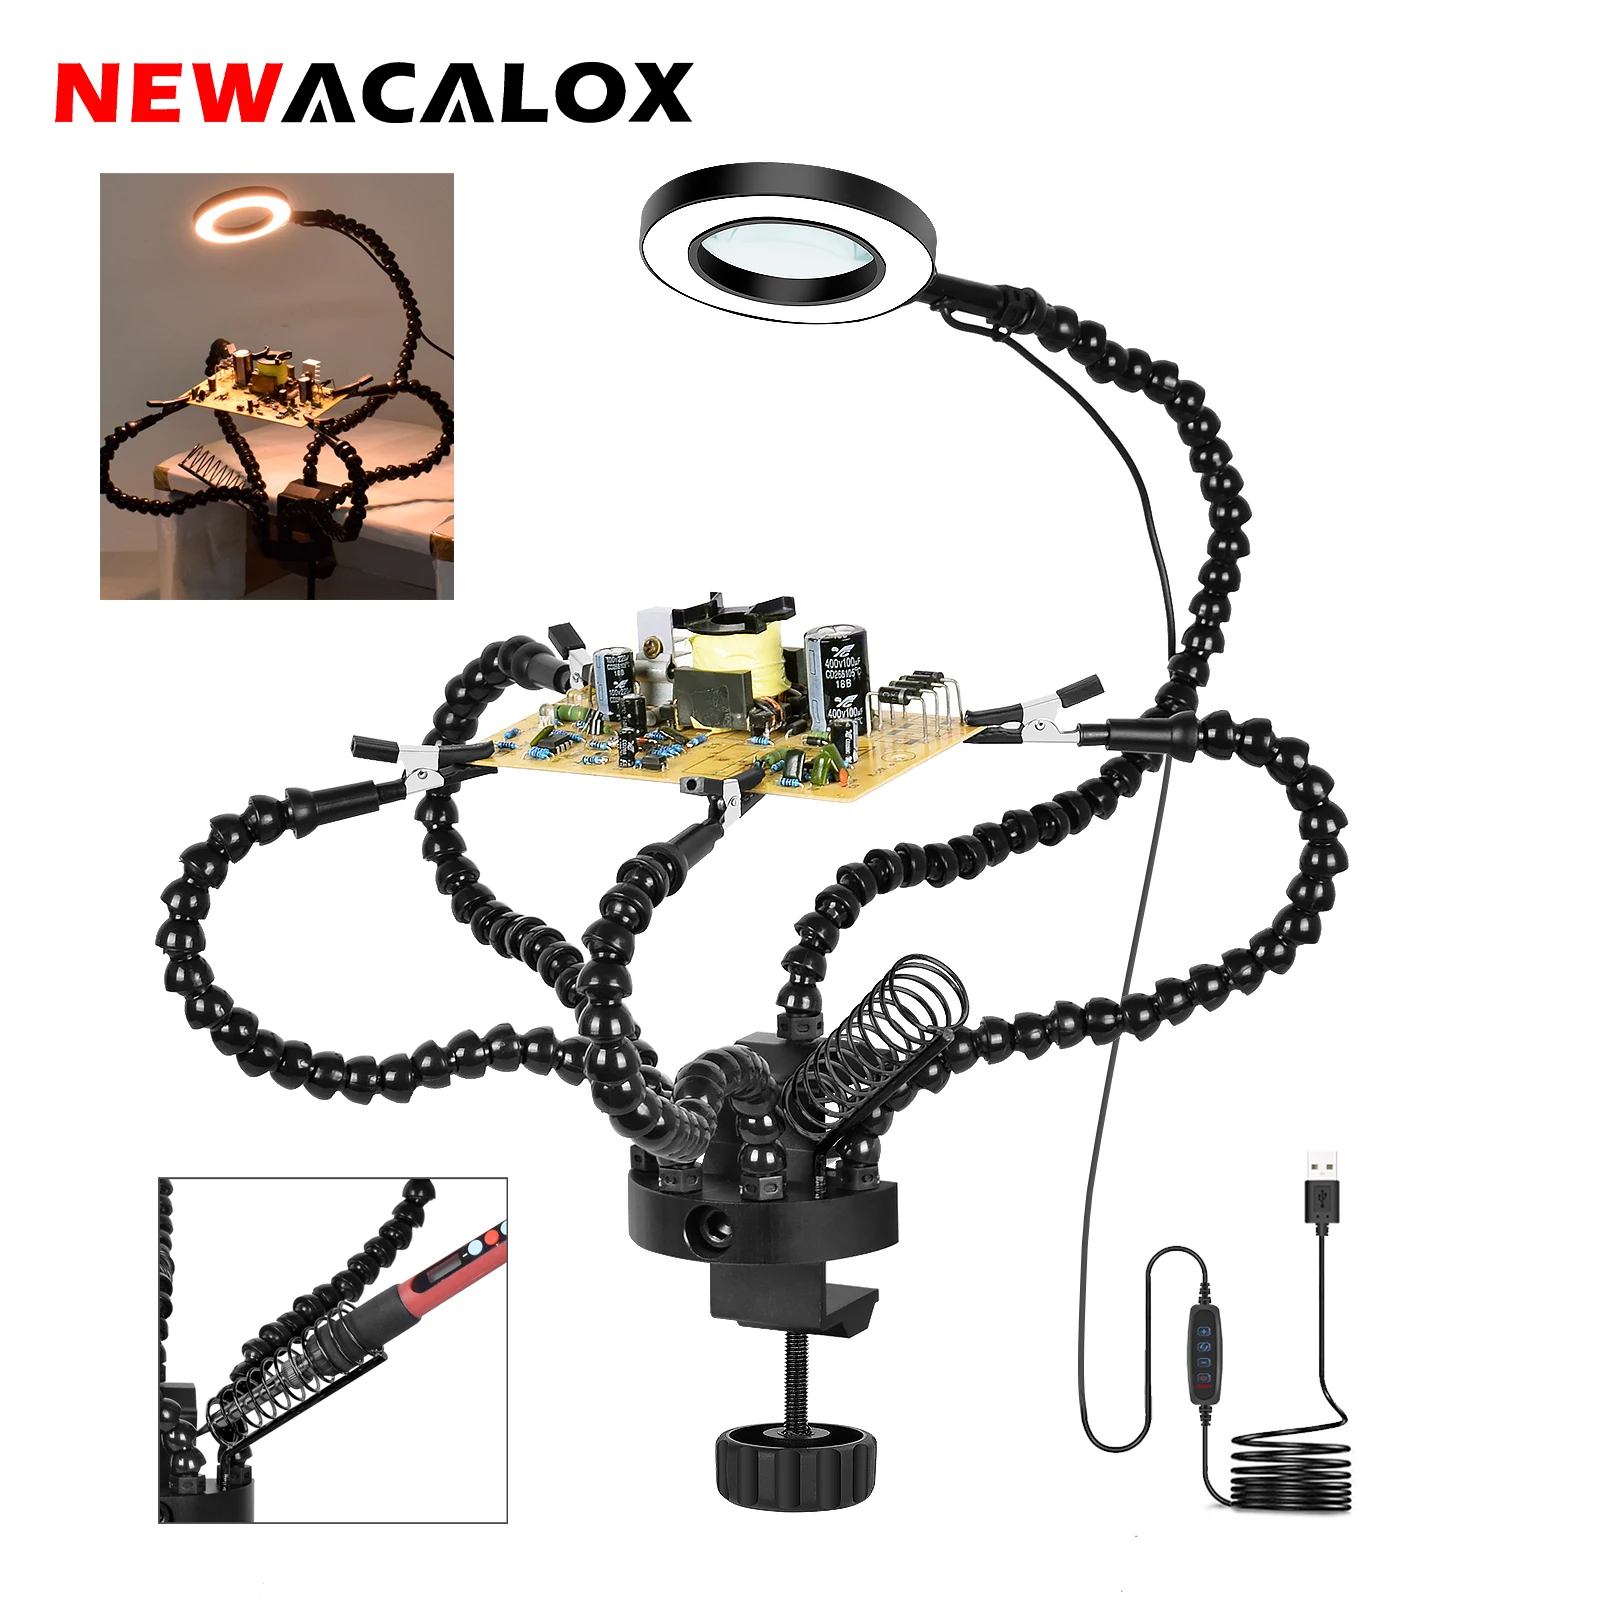 

NEWACALOX Third Hand Soldering Tool with 3X LED Magnifying Glass Desk Clamp Flexible Arm Helping Hands PCB Holder Welding Repair